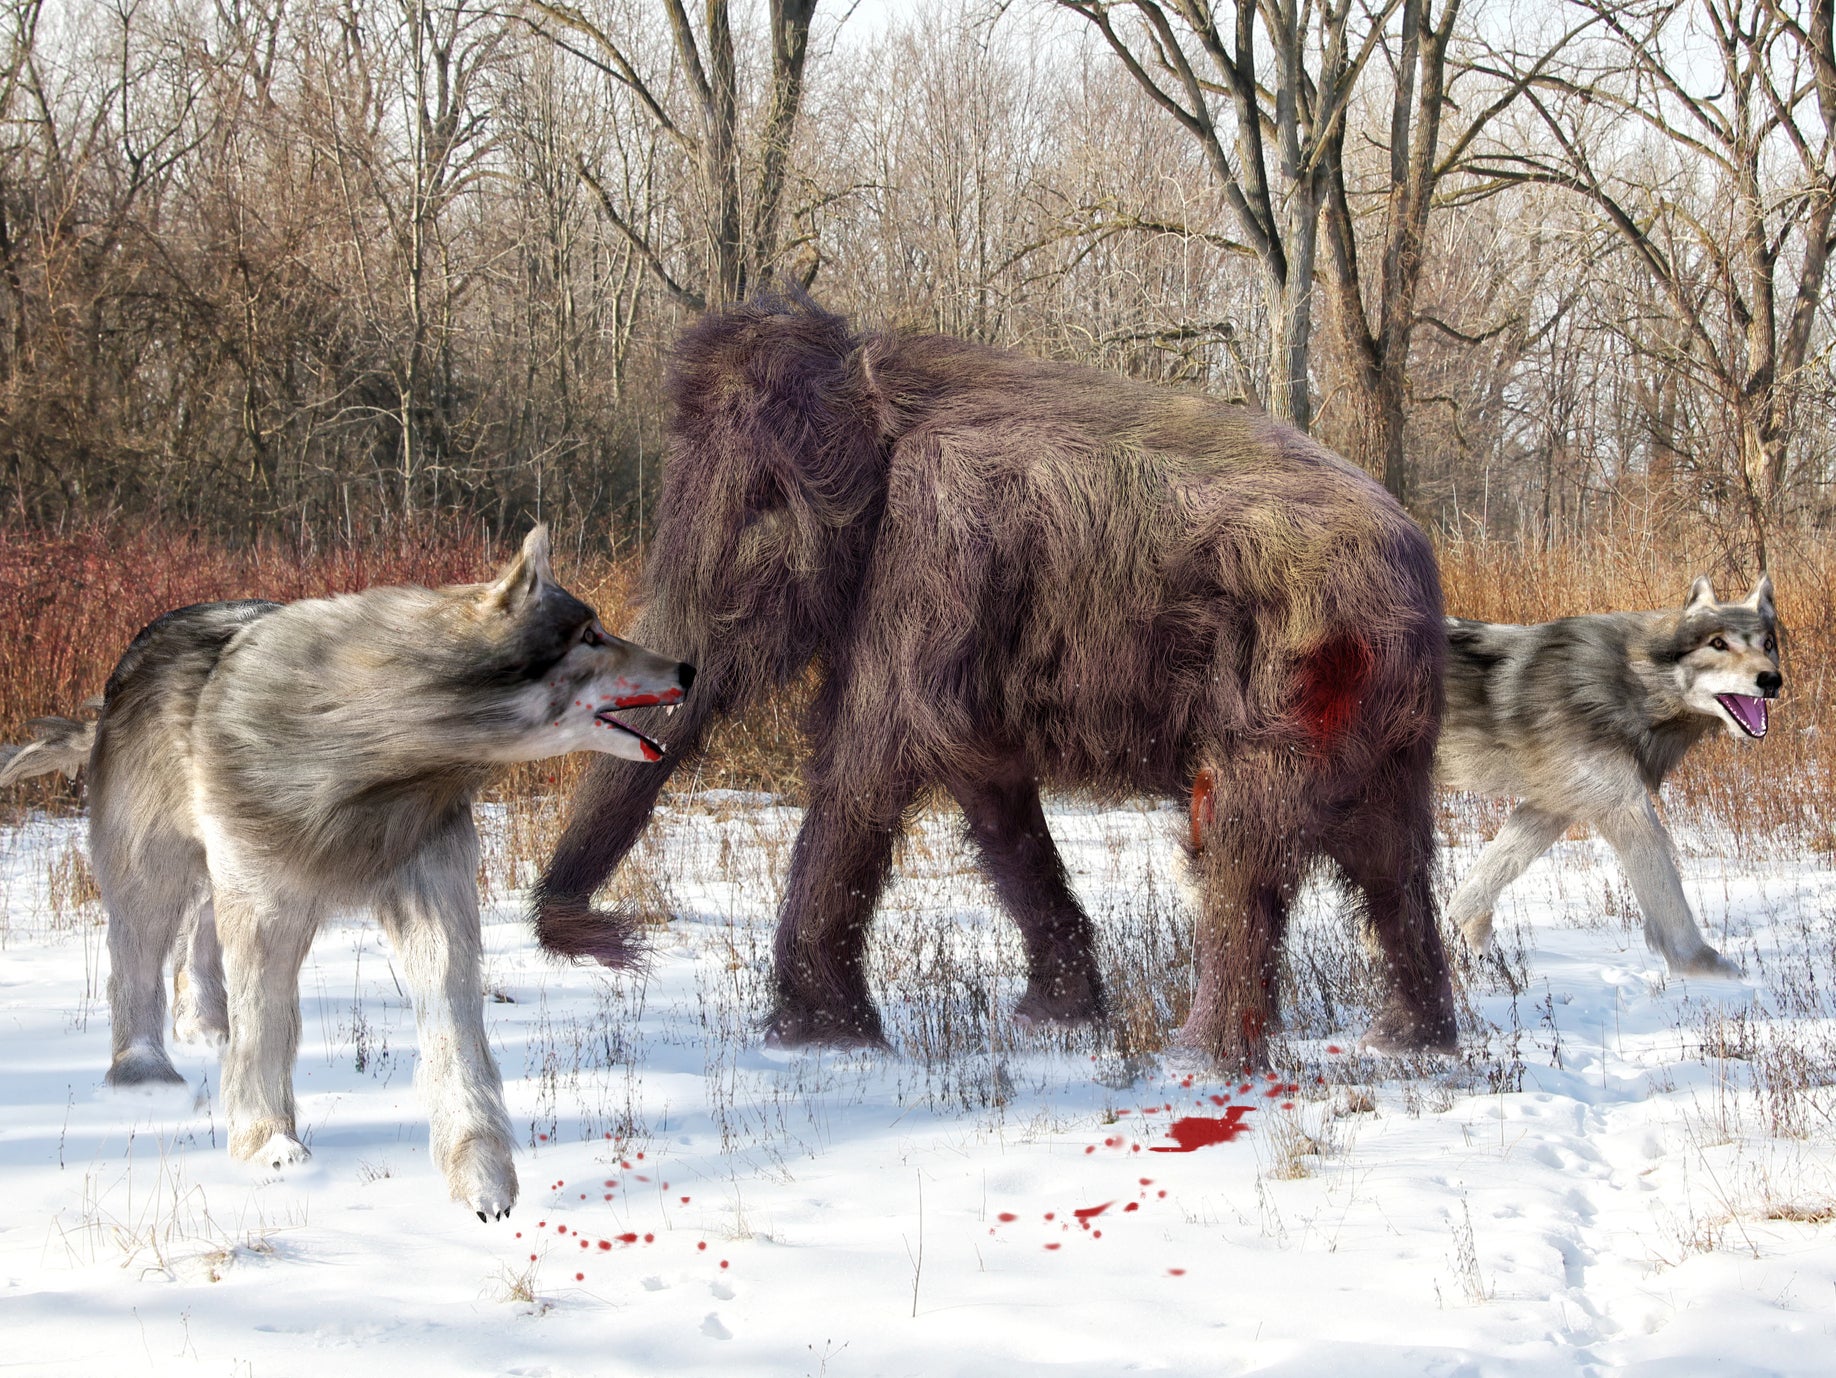 The dire wolf was about 20 per cent larger on average than the grey wolf